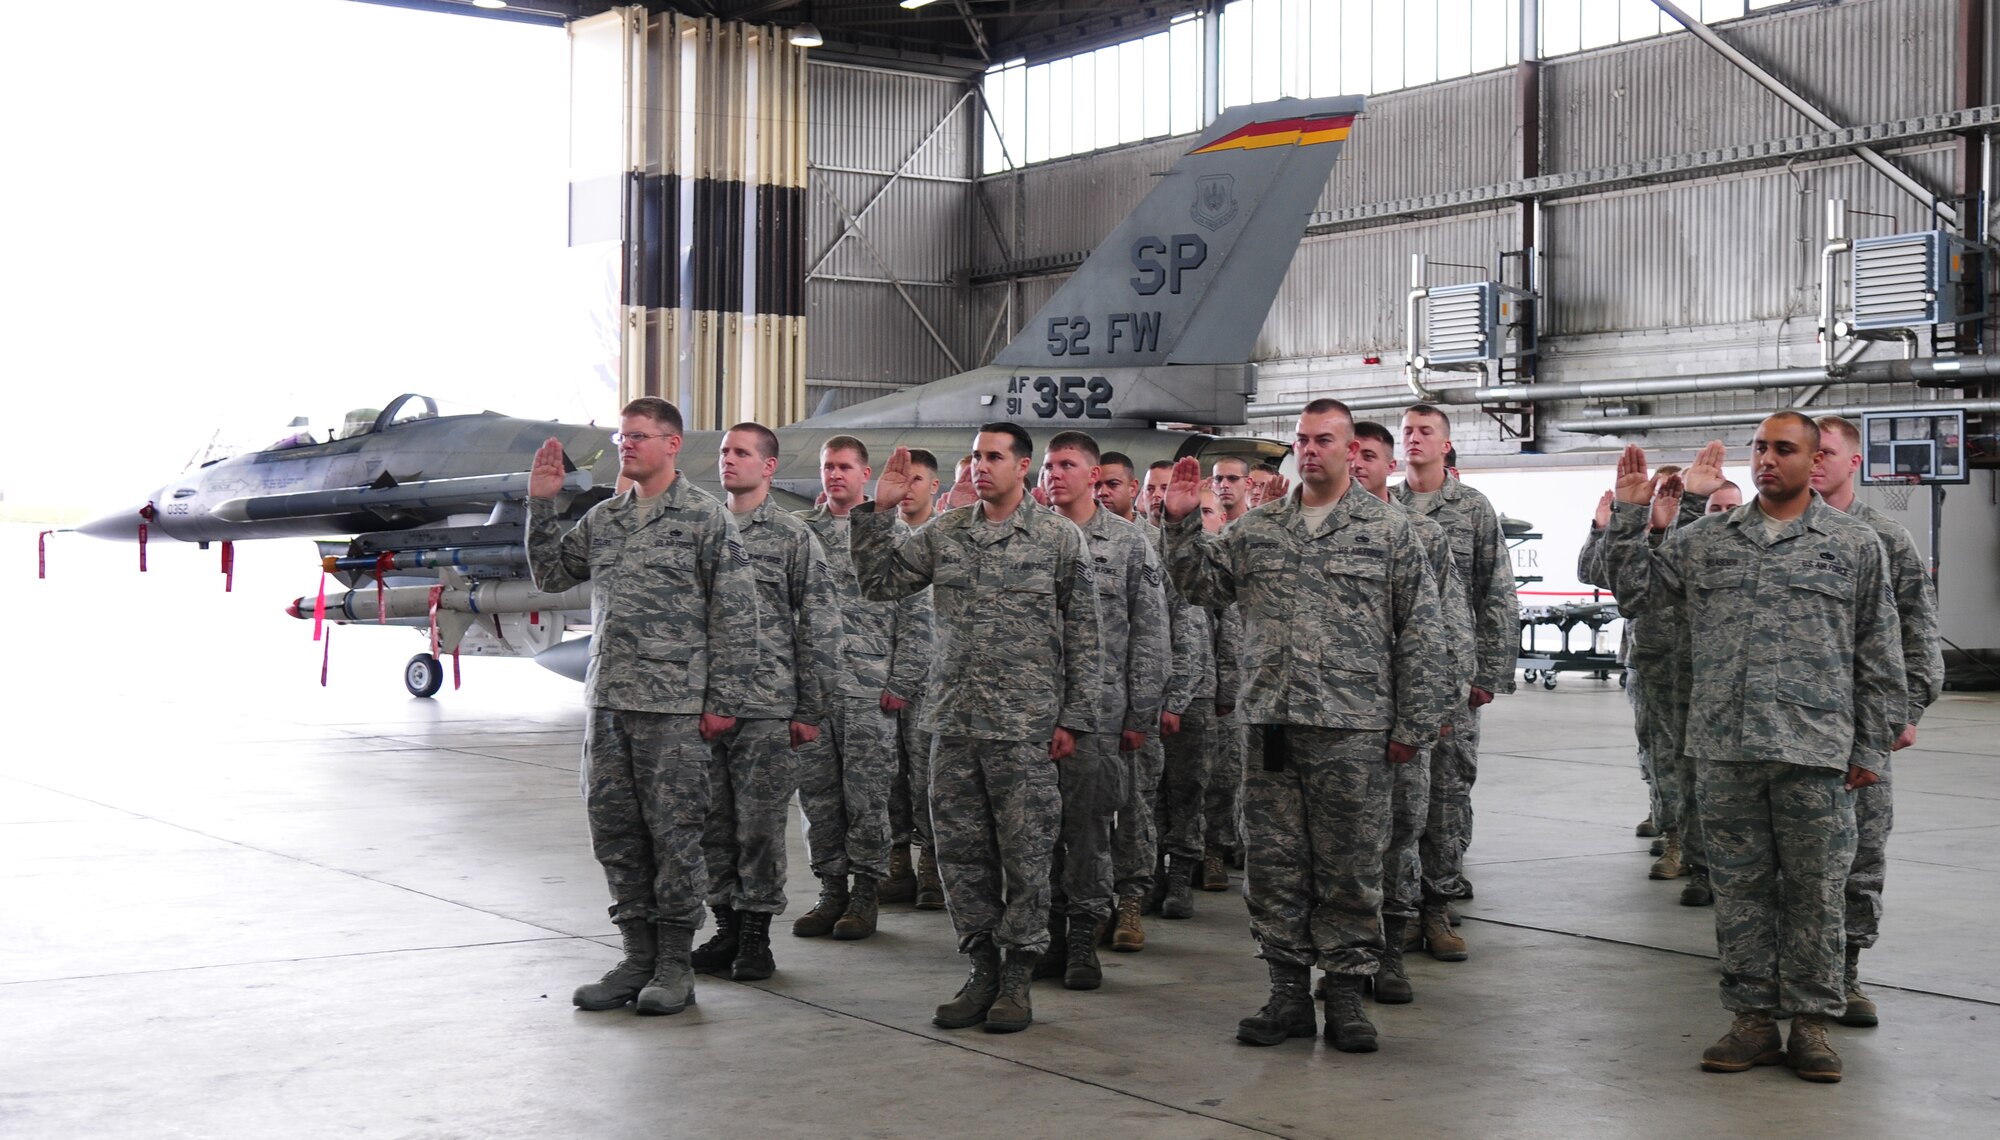 SPANGDAHLEM AIR BASE, Germany -- Twenty-nine F-16 Fighting Falcon crew chiefs take their professional oath during a ceremony recognizing each of their assignments to specific aircraft in the 480th Fighter Squadron fleet Aug 13. The Dedicated Crew Chief Ceremony is meant to recognize crew chiefs for their hard work and dedication to ensuring aircraft are properly maintained and mission-ready. (U.S. Air Force Photo by/Staff Sgt. Heather M. Norris)